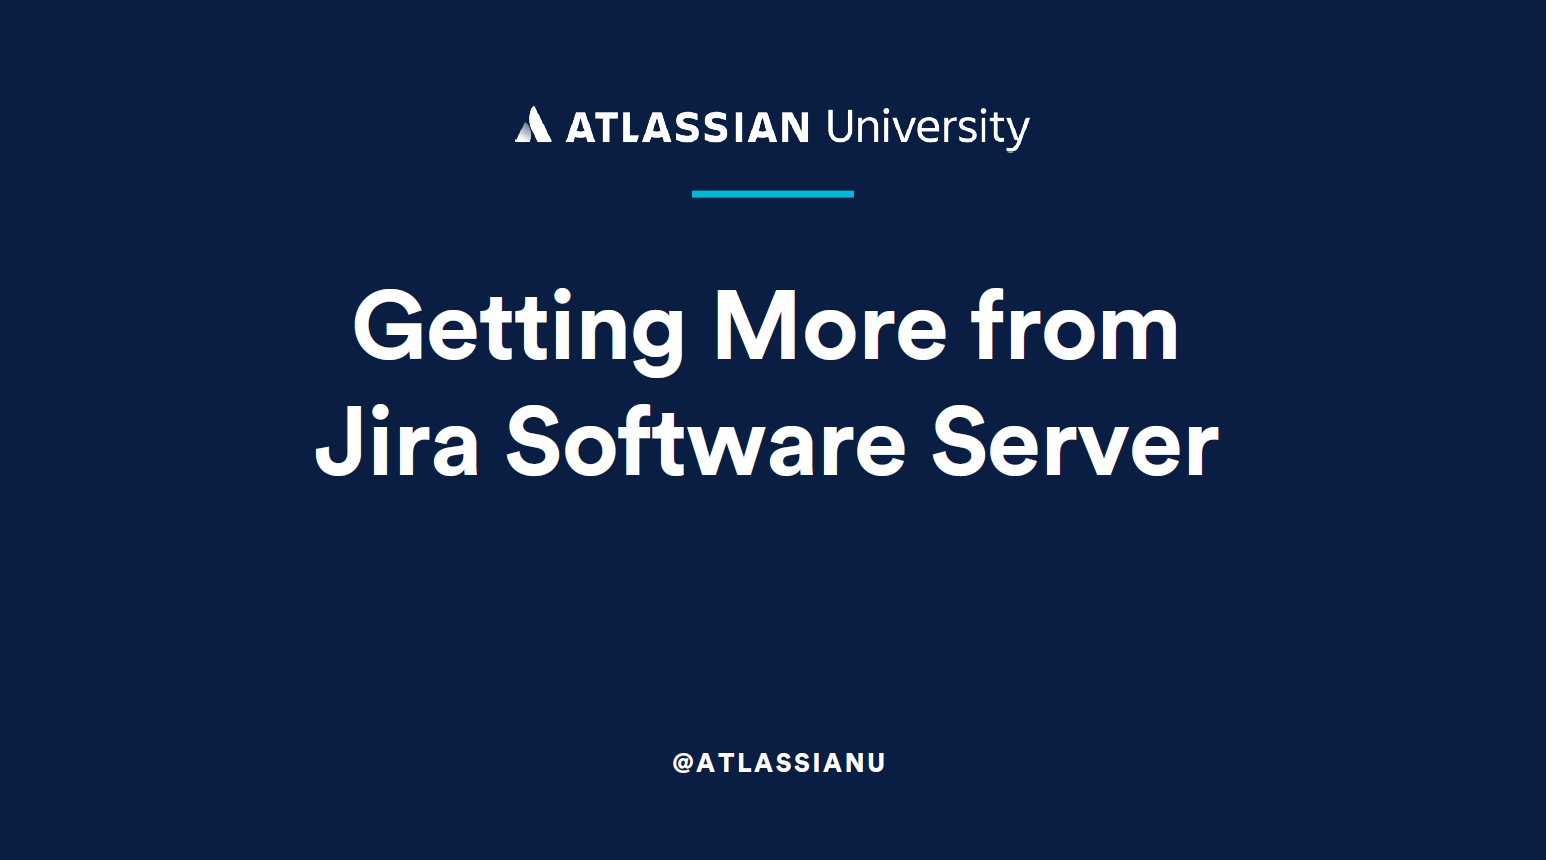 Getting More from Jira Software Server (1)